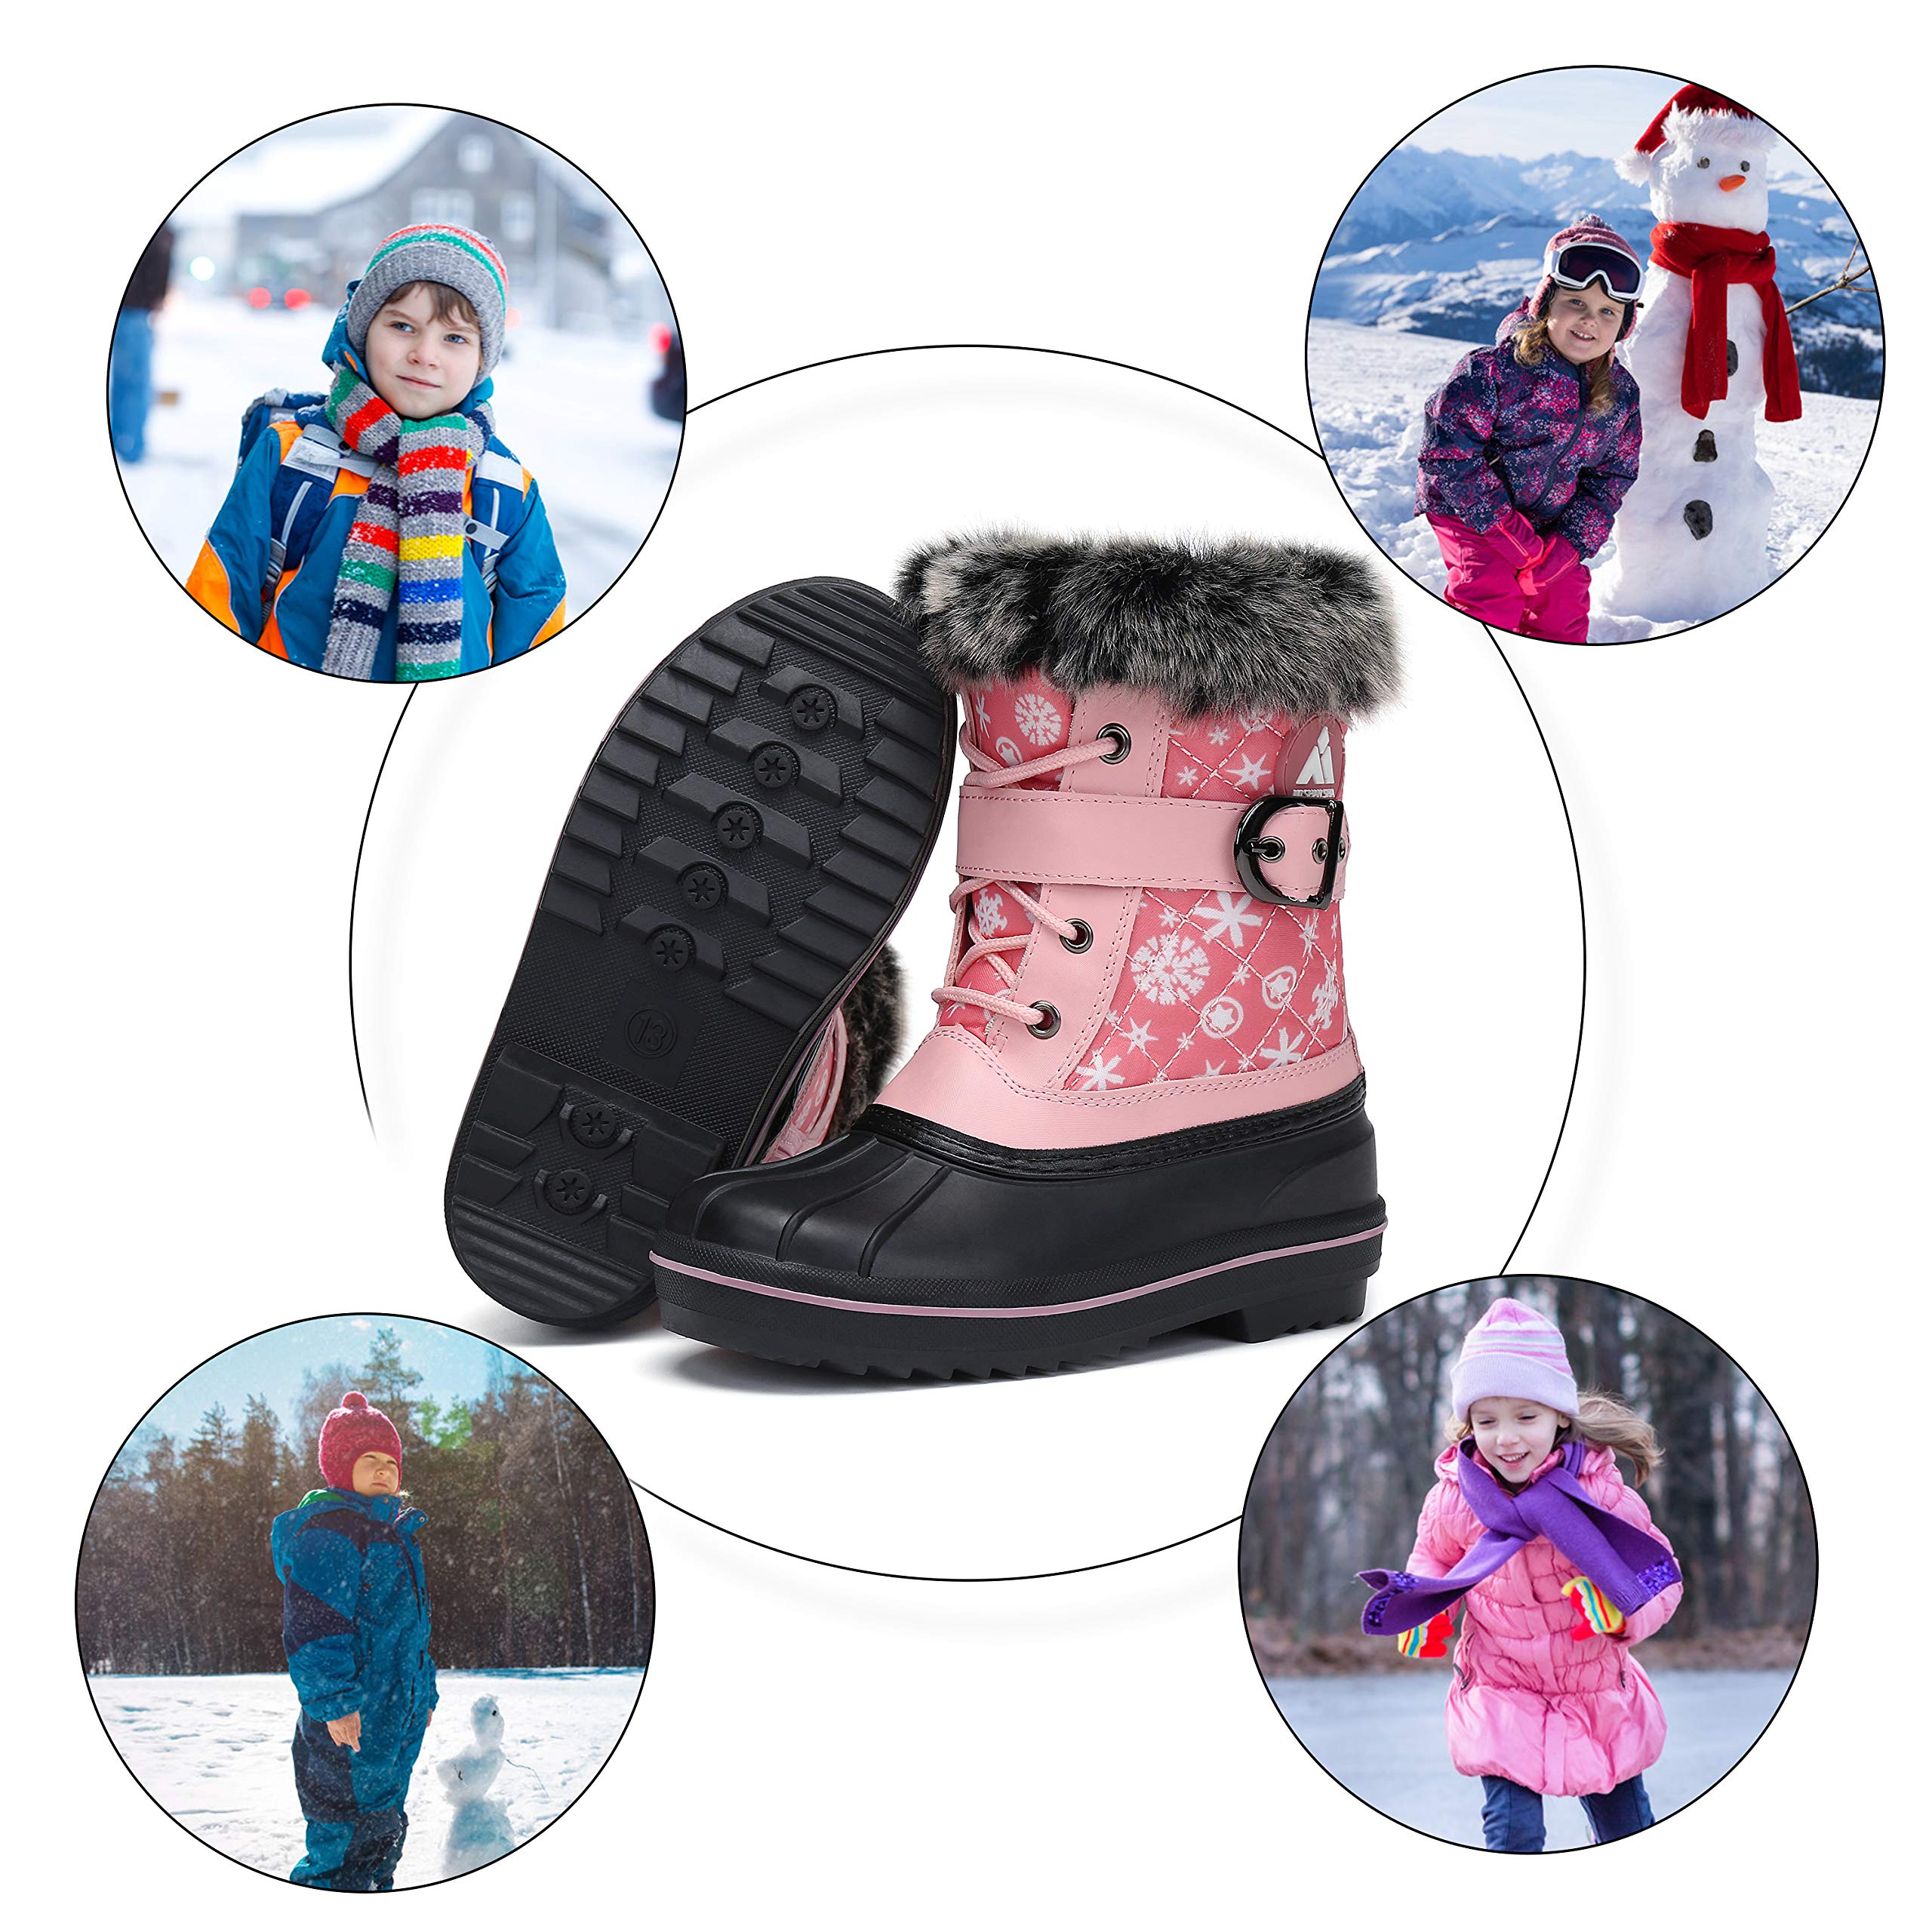 Boys Girls Winter Snow Boots Warm Anti-Slip Waterproof Kids Cold Weather Shoes